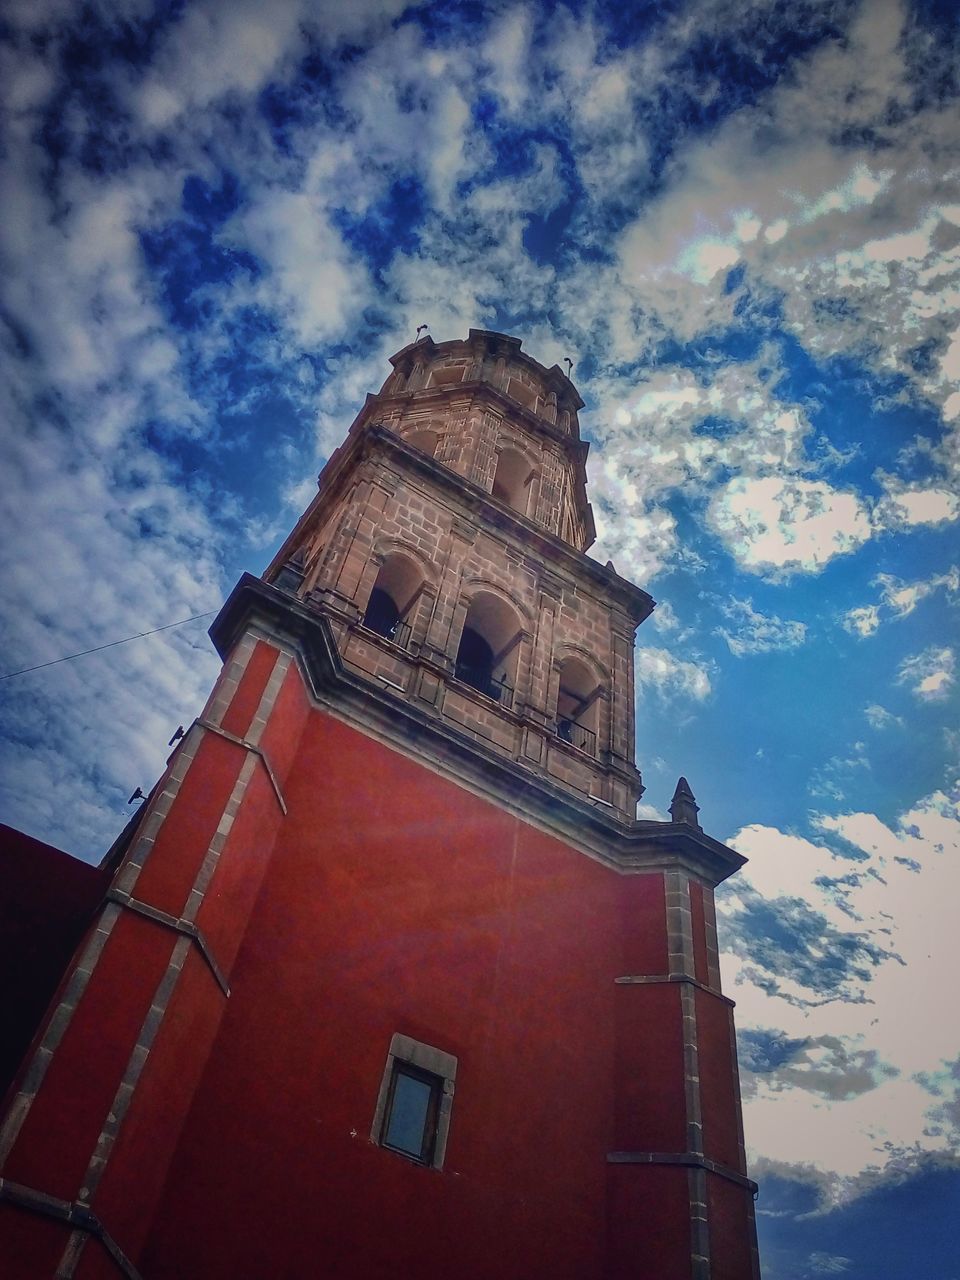 cloud - sky, built structure, architecture, sky, low angle view, building exterior, building, nature, belief, spirituality, tower, place of worship, religion, no people, day, the past, history, outdoors, clock